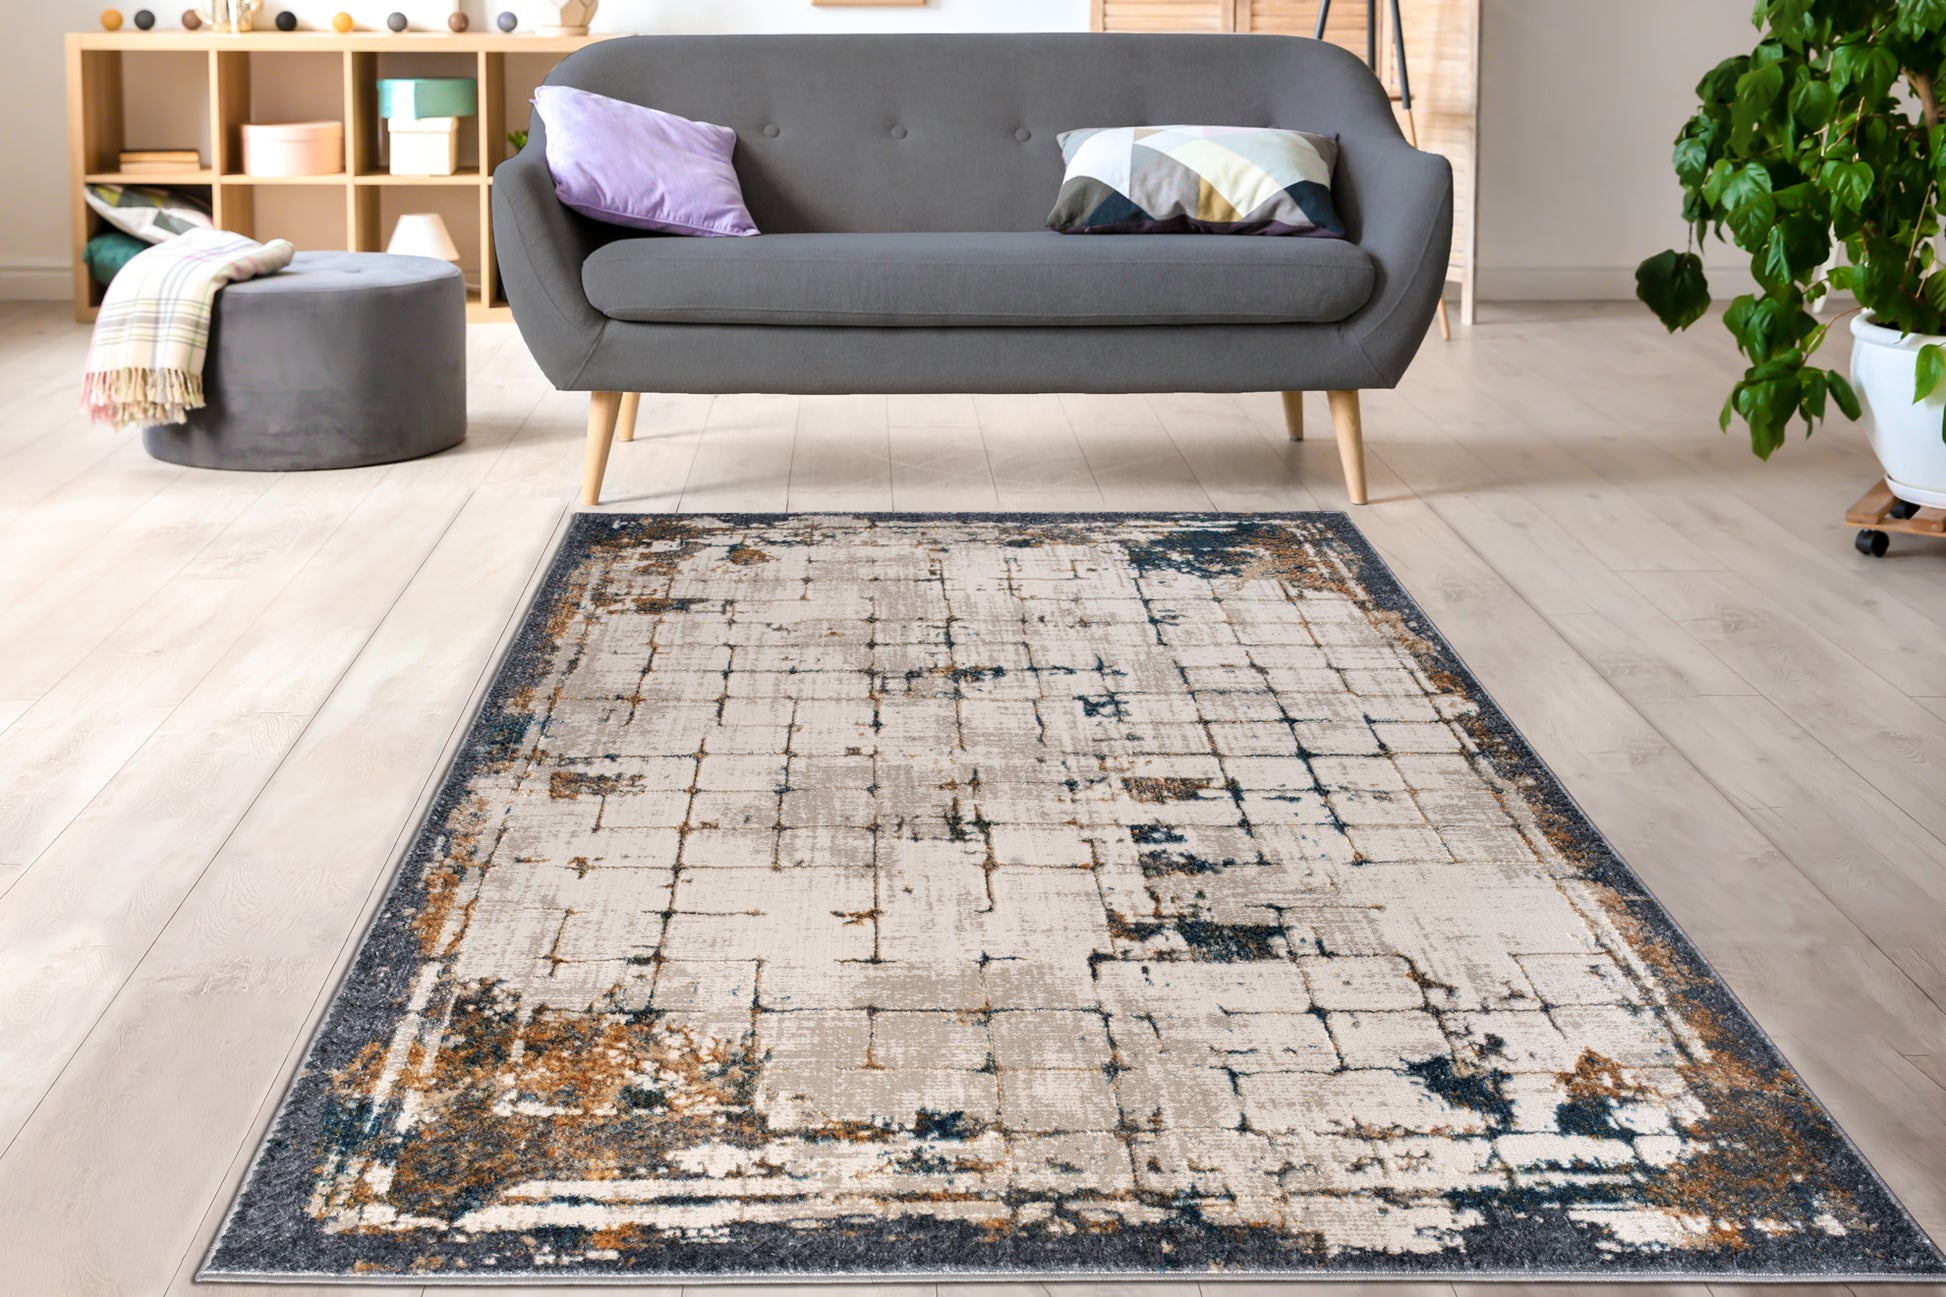 beige brown silver blue metalic abstract modern contemporary minimalistic bordered area rug 4x6, 4x5 ft Small Carpet, Home Office, Living Room, Bedroom